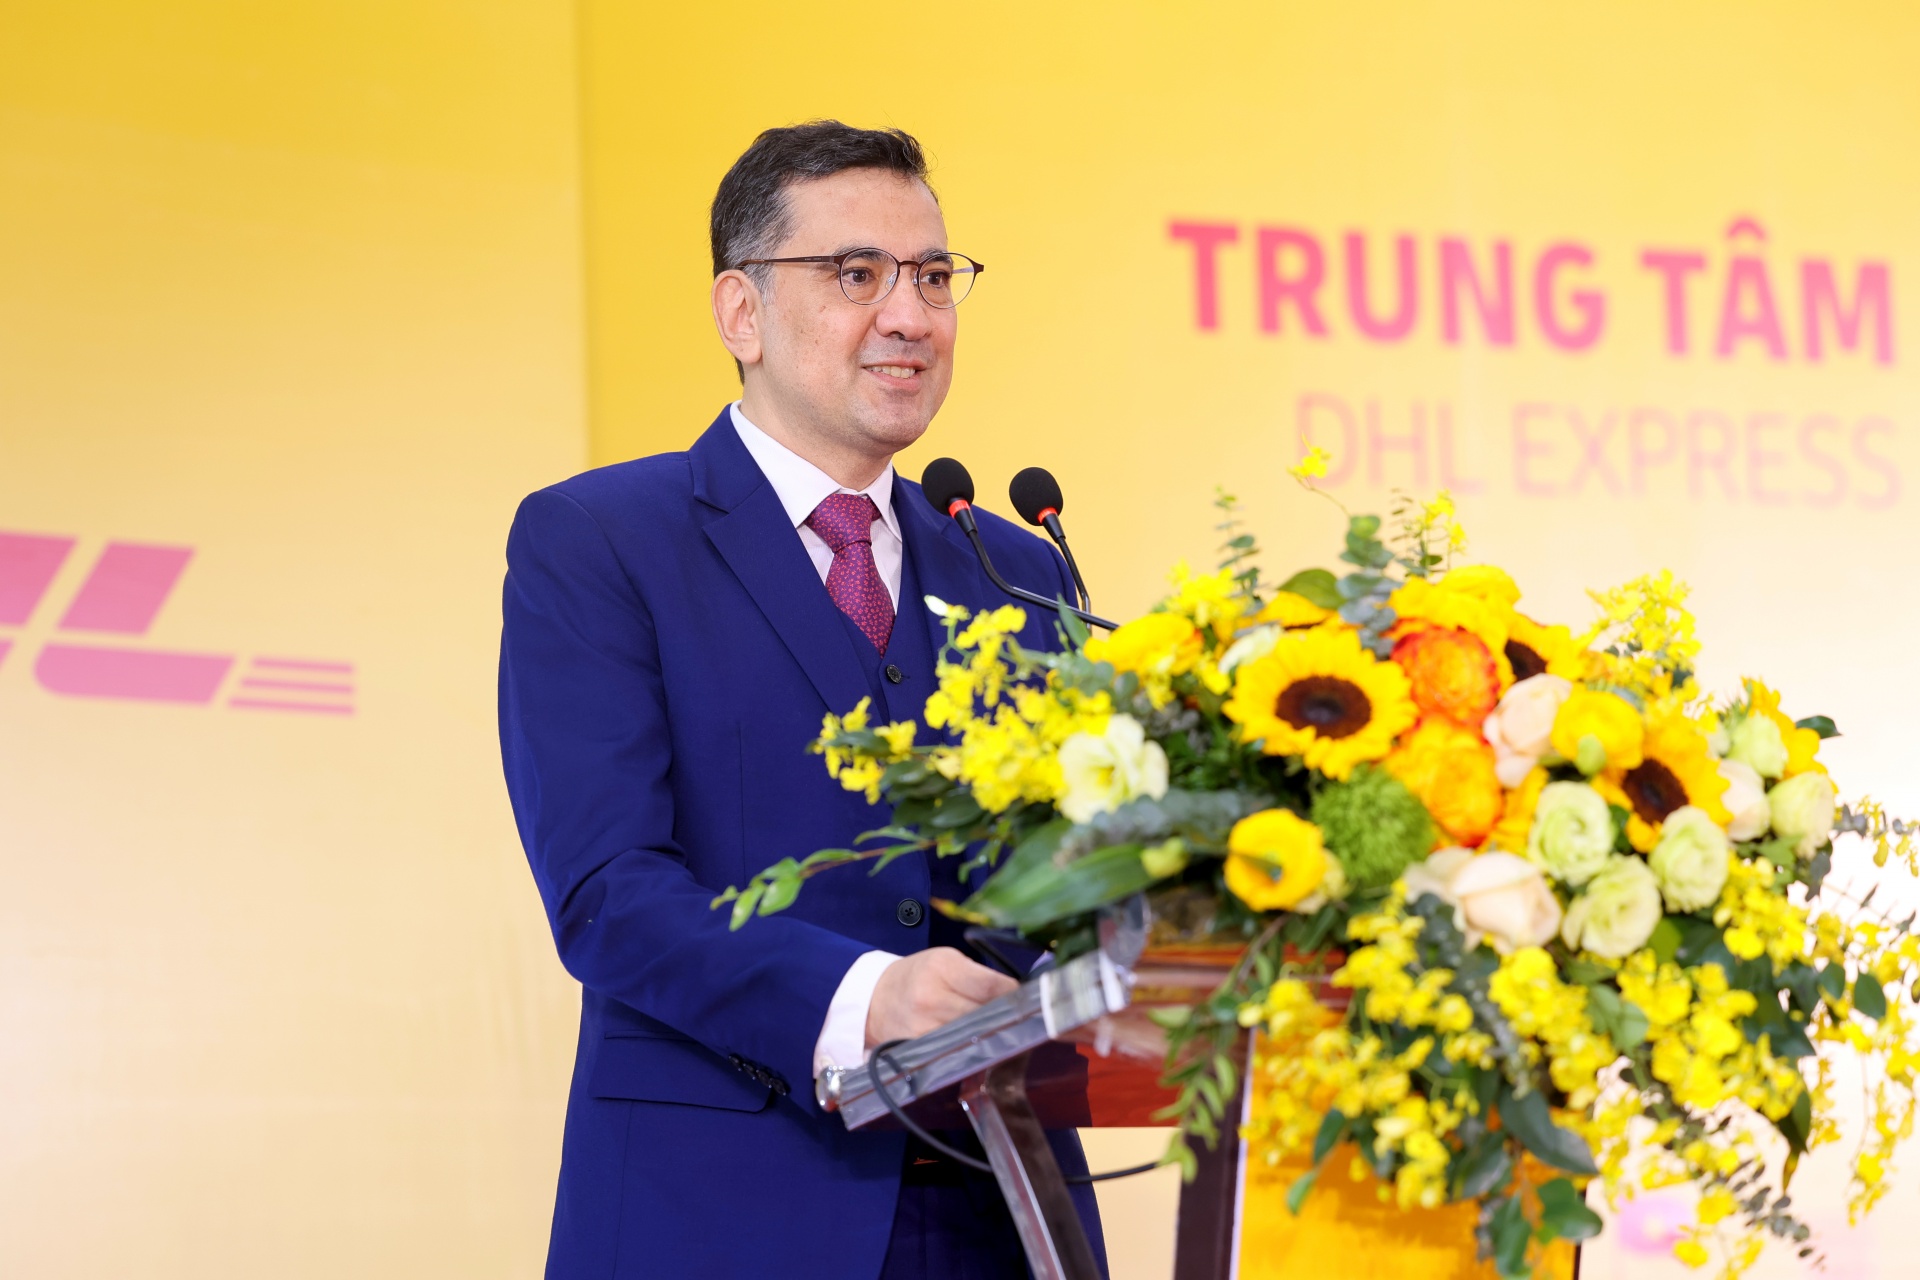 DHL Express opens new gateway in Hanoi